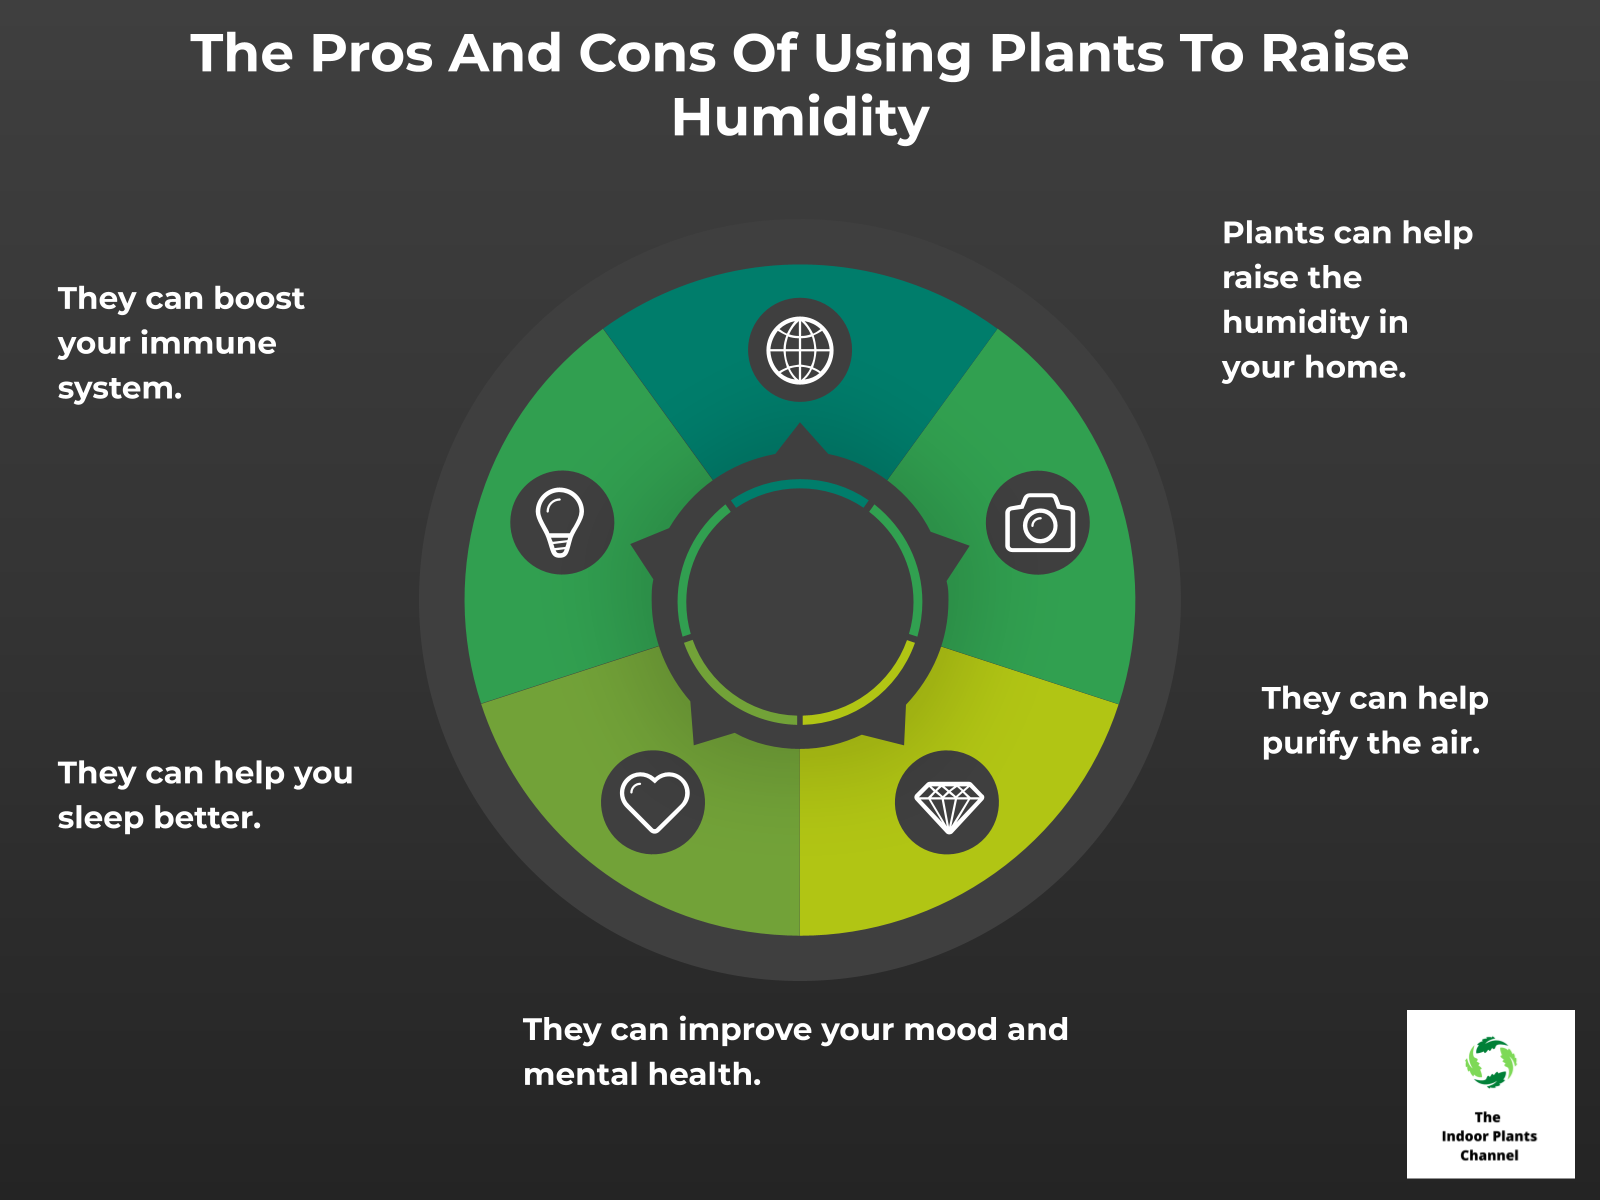 INFOGRAPHIC: The Pros and Cons of Using Plants to Raise Humidity